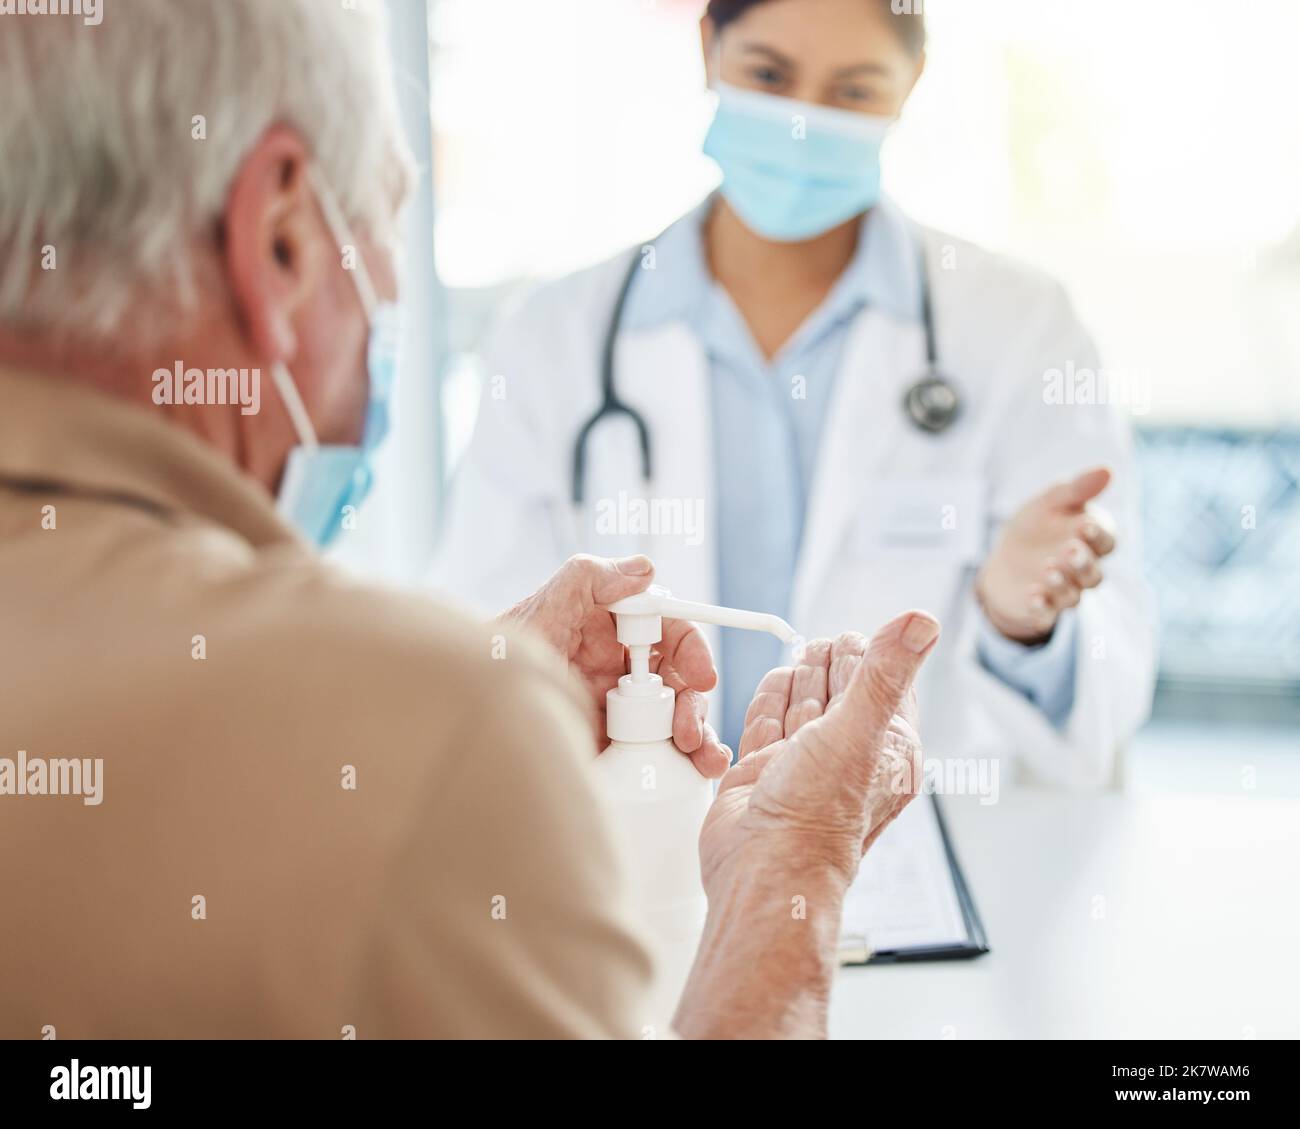 Lets get those hands germ-free. an unrecognizable man sitting with his doctor and using hand sanitiser during his consult in the clinic. Stock Photo